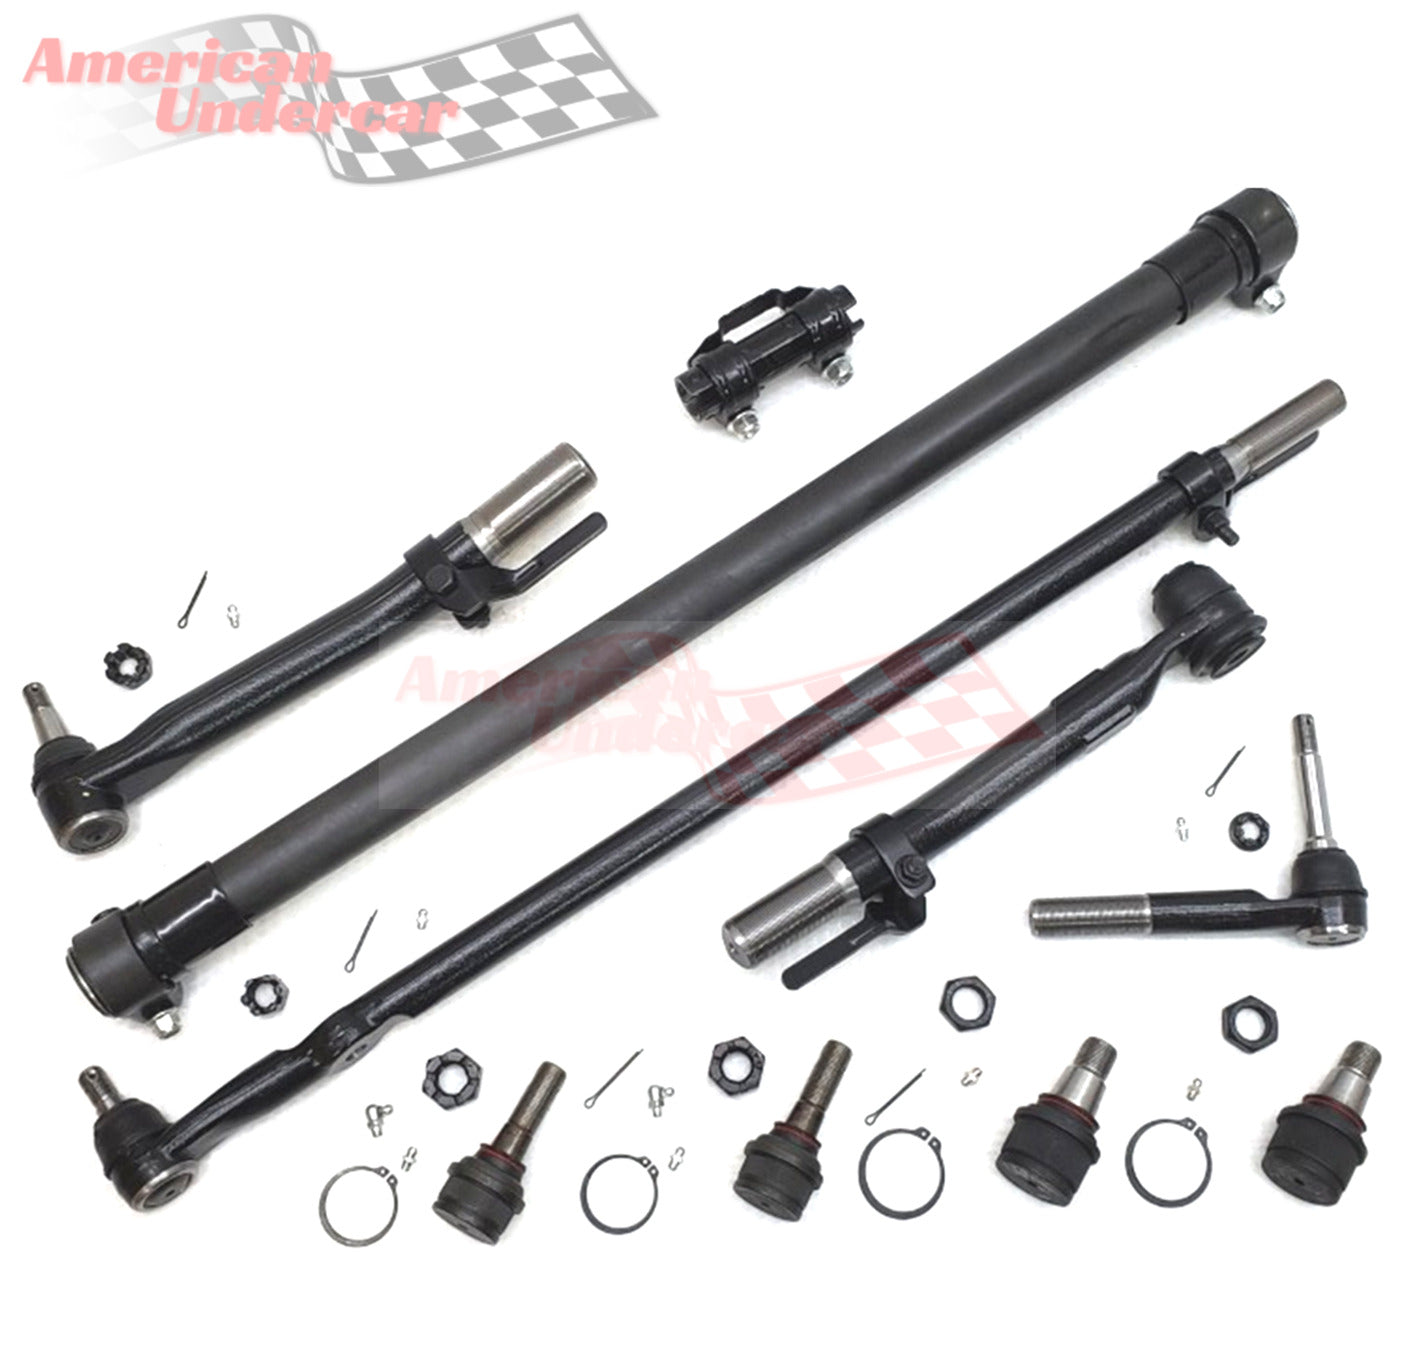 XRF Ford F250 Super Duty WIDE AXLE Steering and Suspension Kit 2017 - 2022 4x4